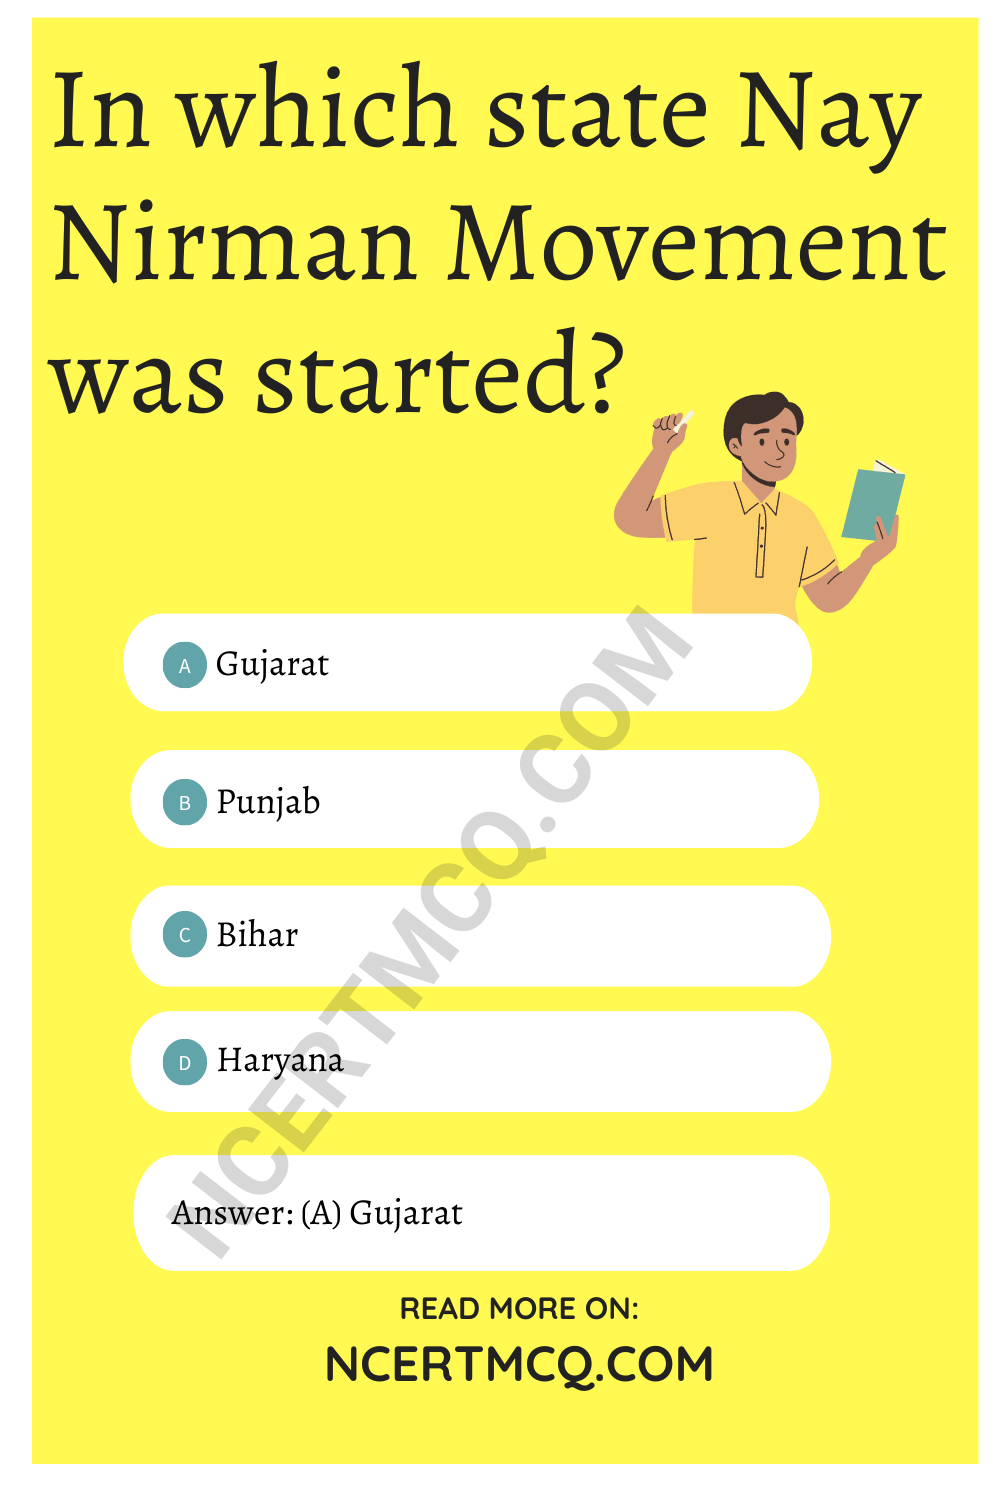 In which state Nay Nirman Movement was started?